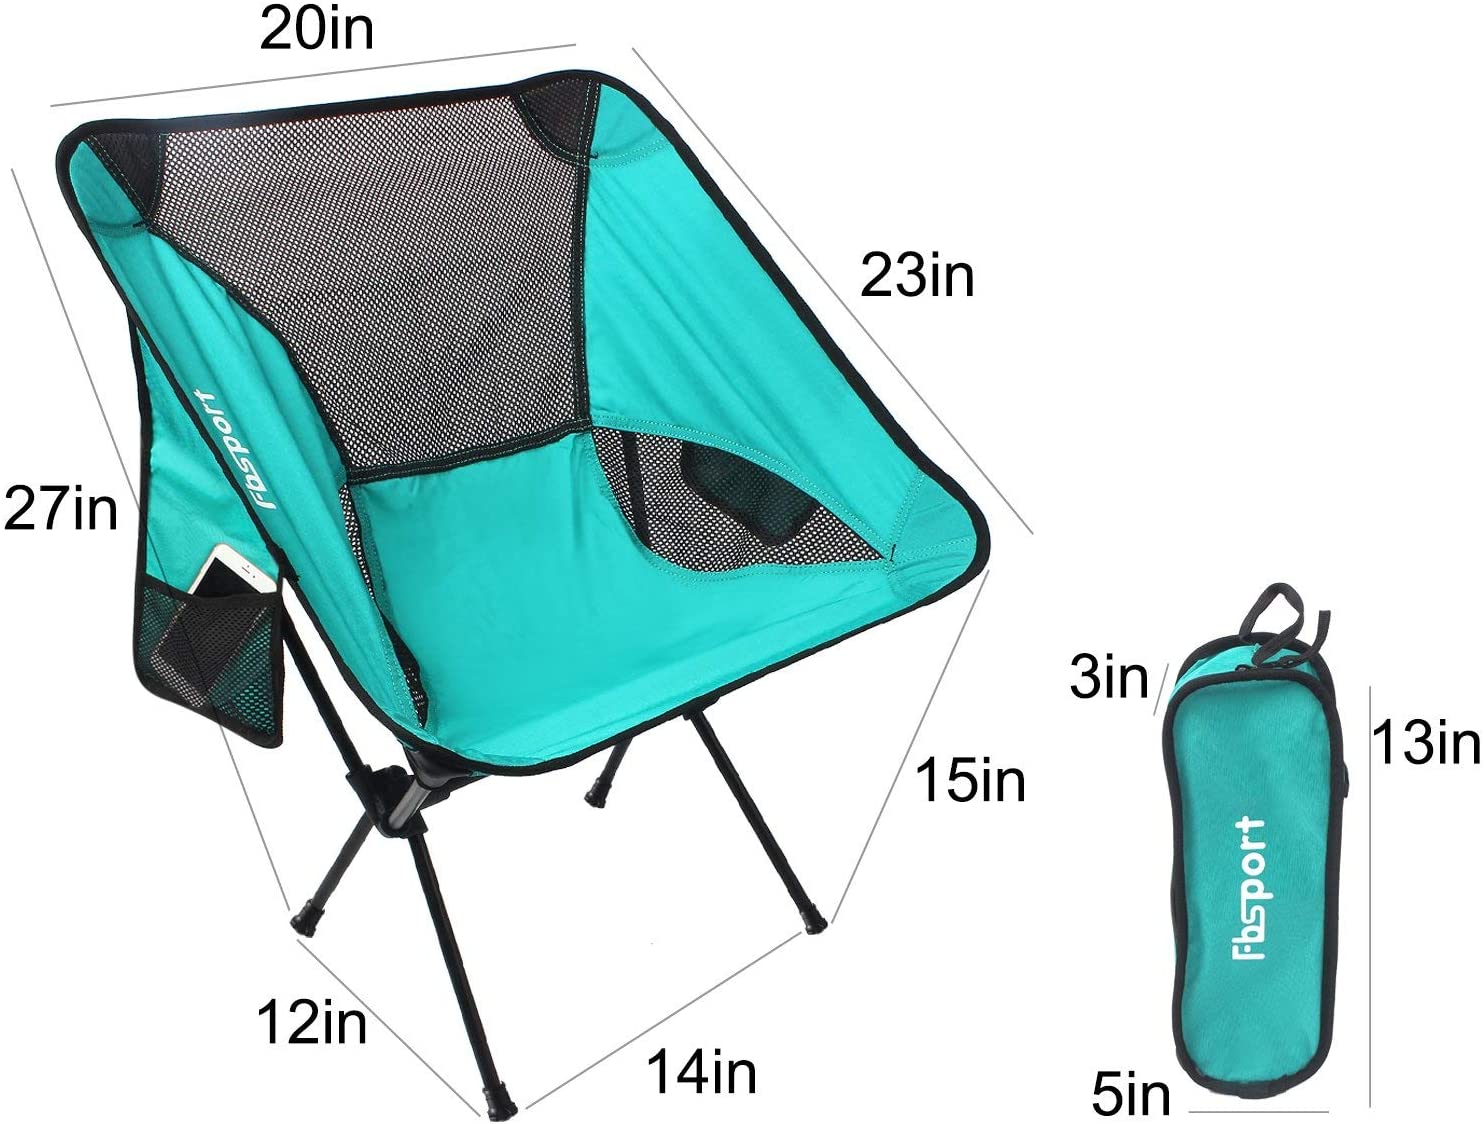 2pc Backpacking Camping Chairs, Lightweight Portable Camping Chair, Foldable Chair, Outdoor Chair, Kids Camp Chair, Camping Chairs 2 Pack for Adults, Folding Chairs, Outside Chairs - image 2 of 7